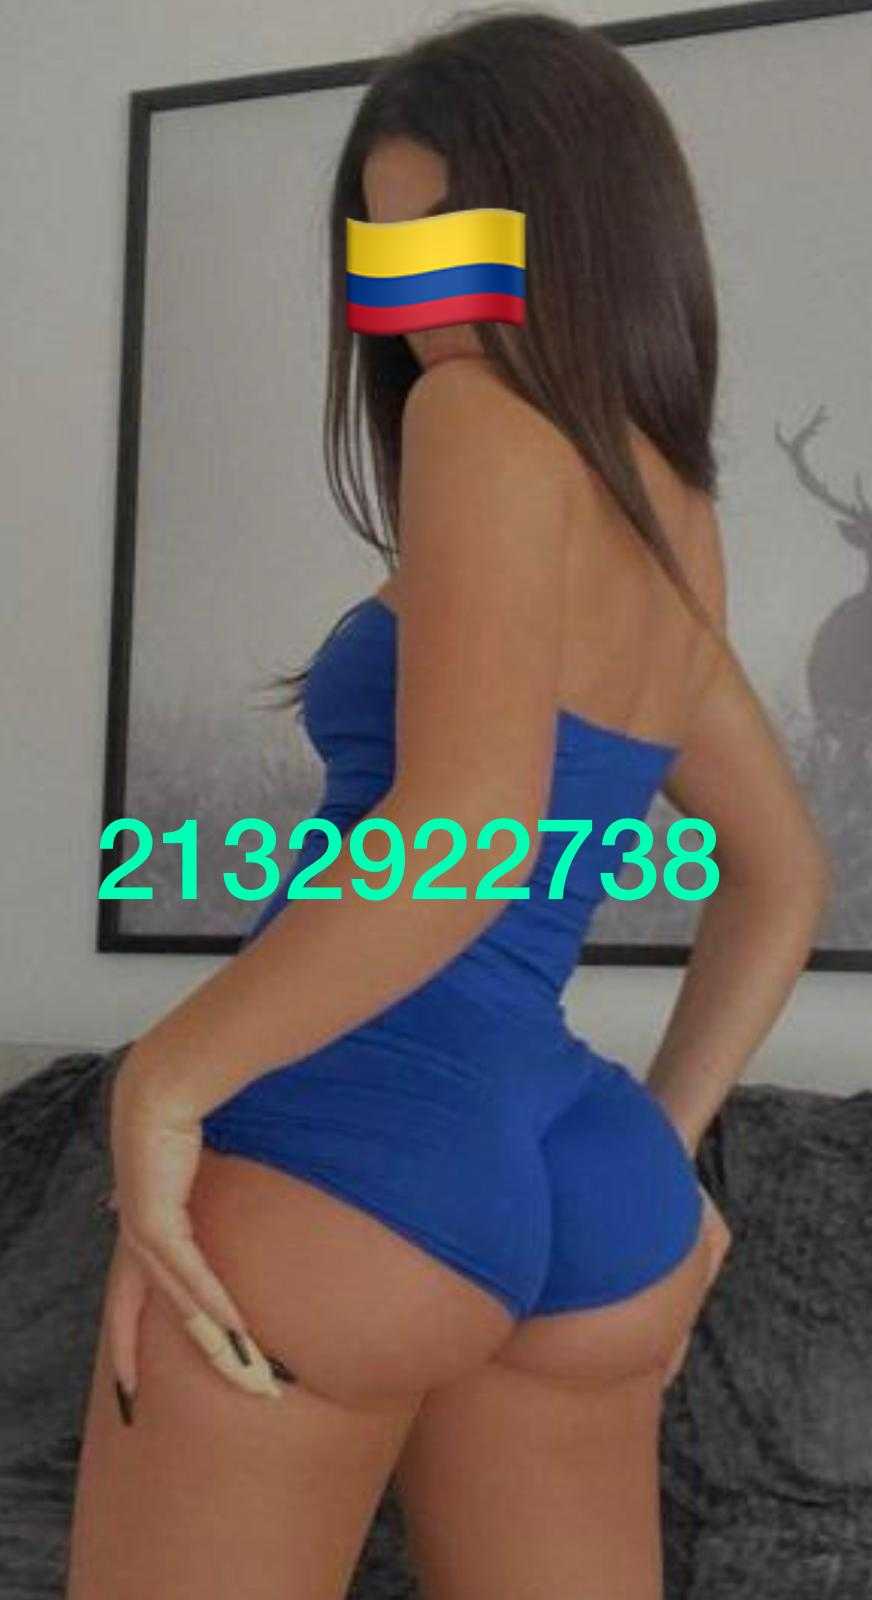 Reviews about escort with phone number 2132922738